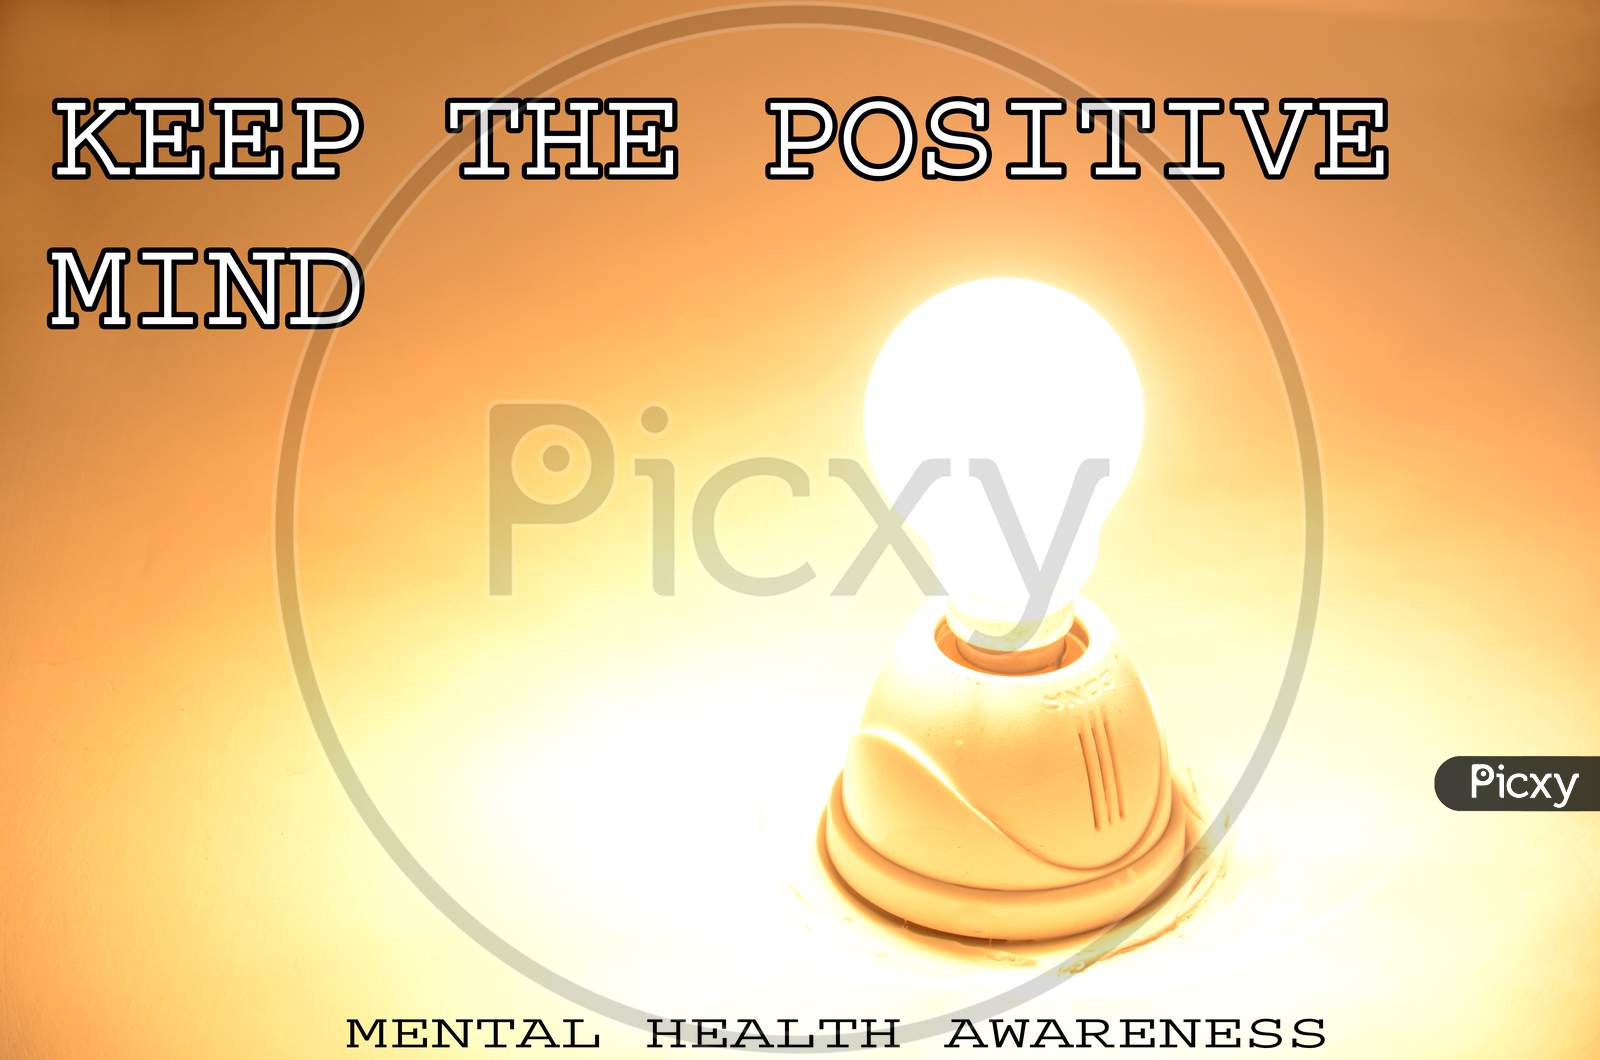 Keep The Positive Mind With Light Bulb Concept Mental Health Awareness On The Yellow White Background.